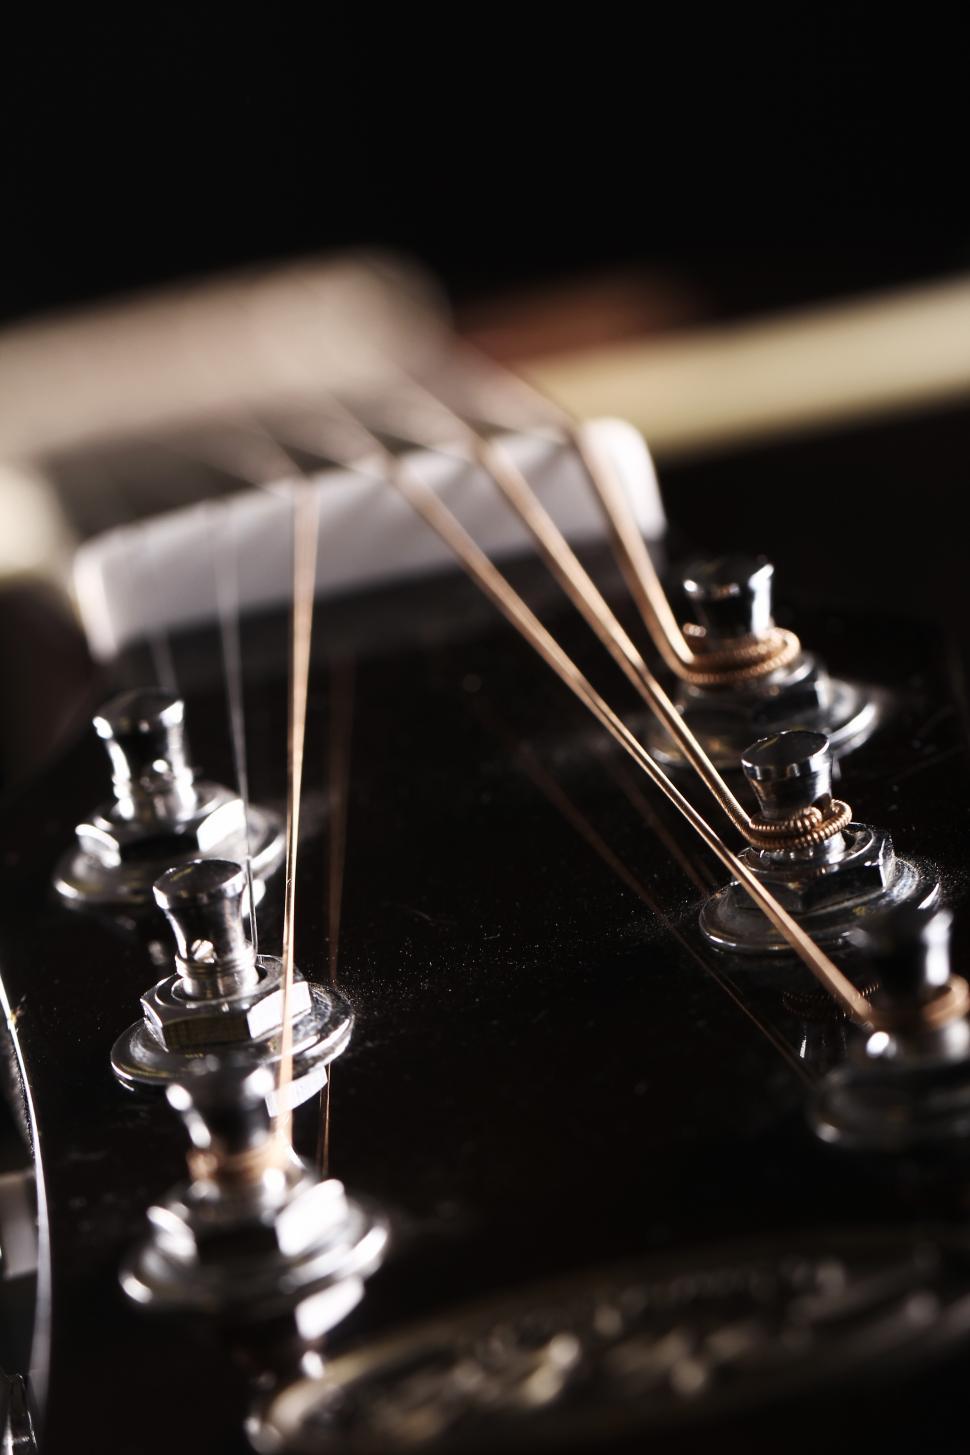 Free Image of Head of a classic acoustic guitar, tuning pegs 